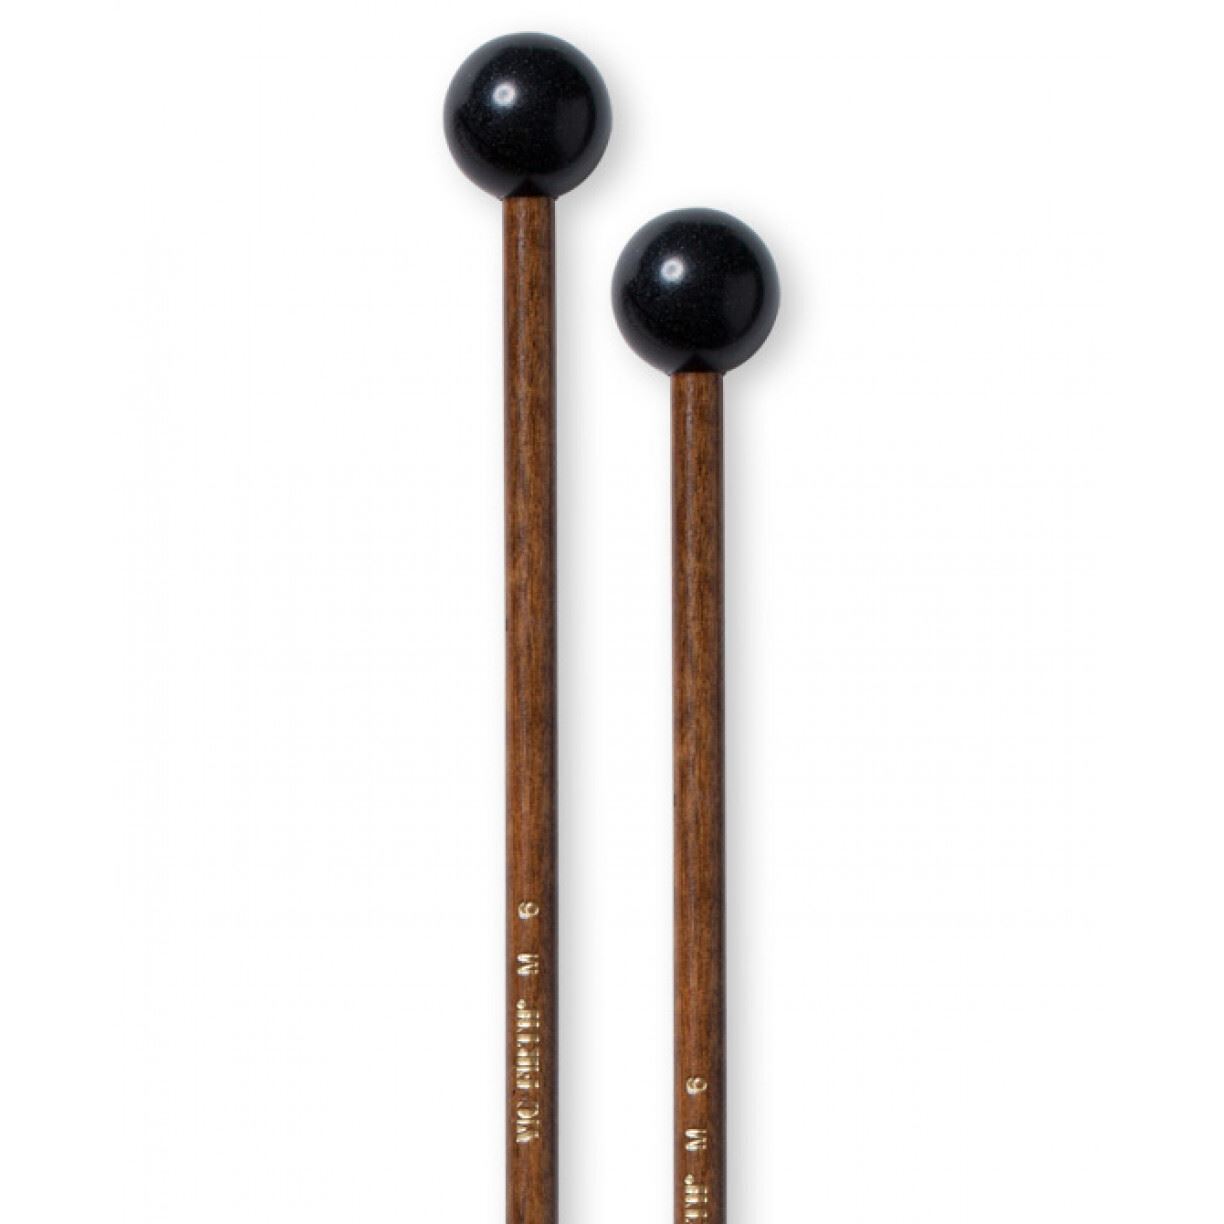 Vic Firth M6 Hard Rubber Mallets